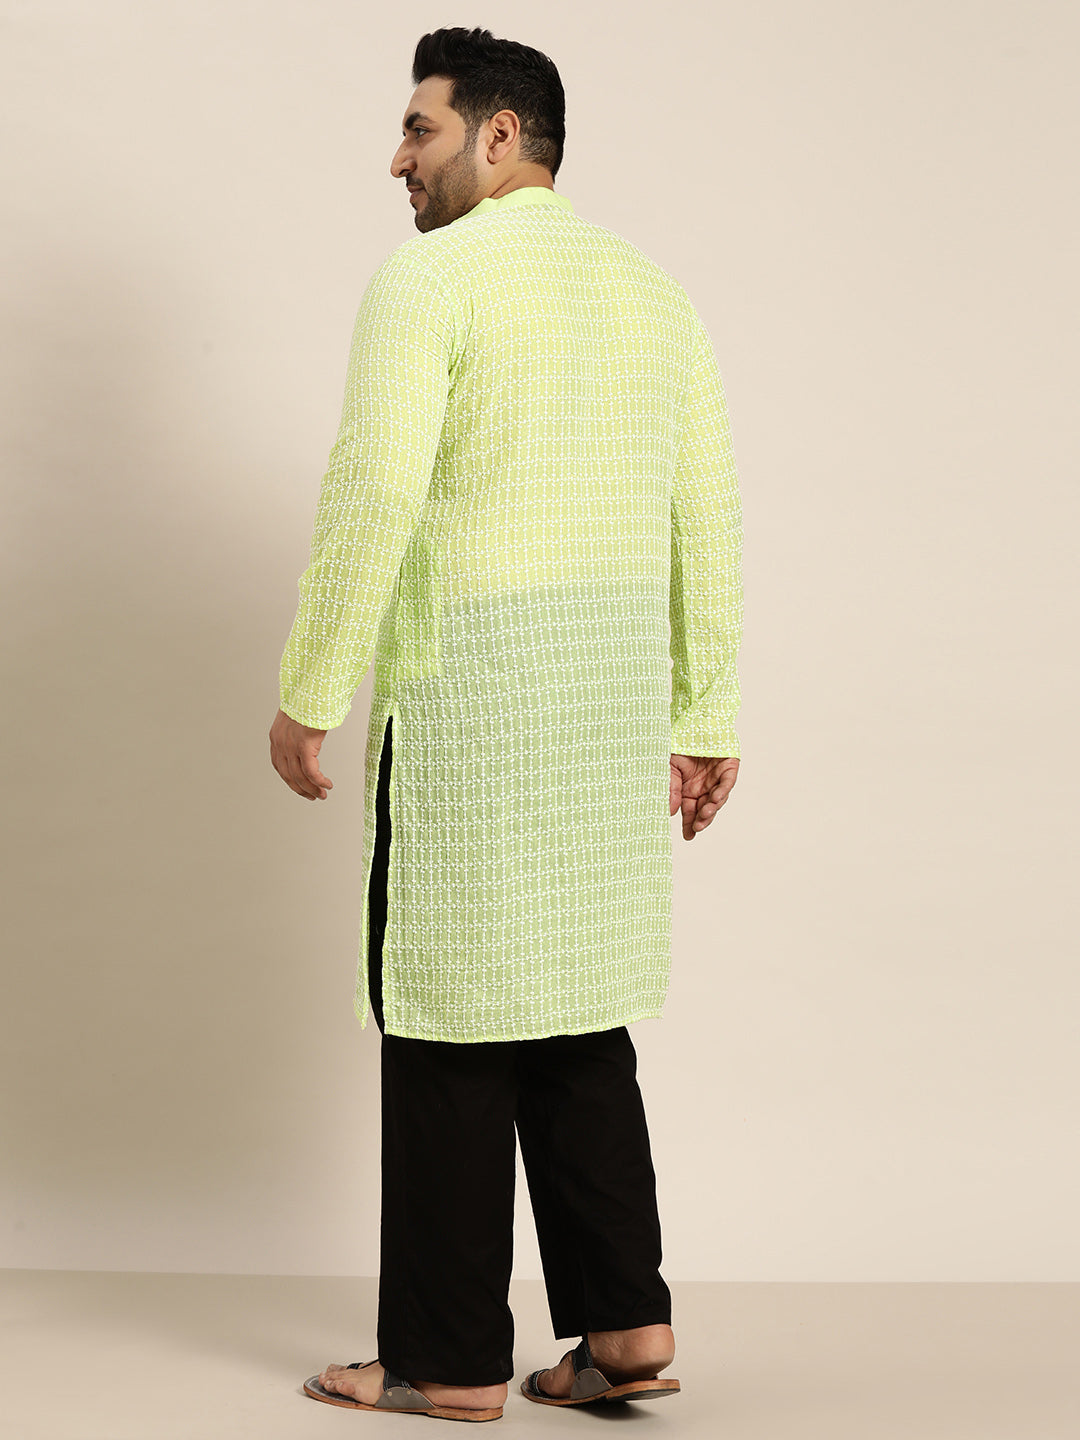 Men's Pure Cotton Green Kurta with White Embroidery